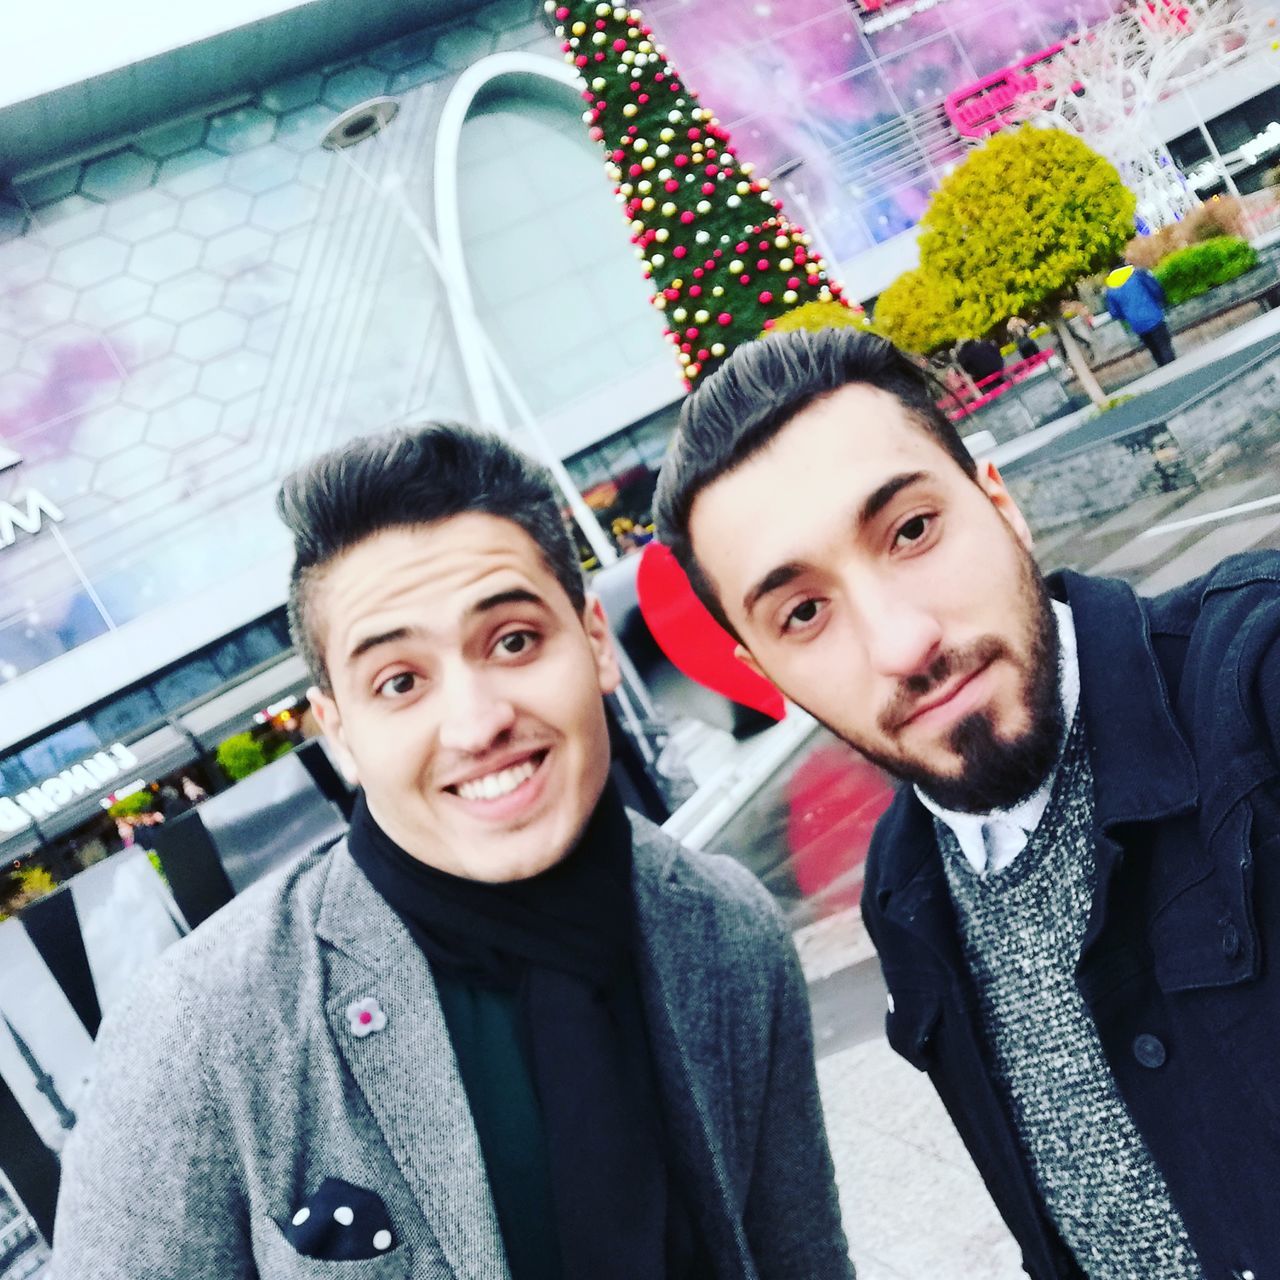 portrait, two people, young men, smiling, looking at camera, young adult, real people, headshot, togetherness, men, people, lifestyles, emotion, front view, happiness, clothing, architecture, bonding, casual clothing, couple - relationship, warm clothing, positive emotion, scarf